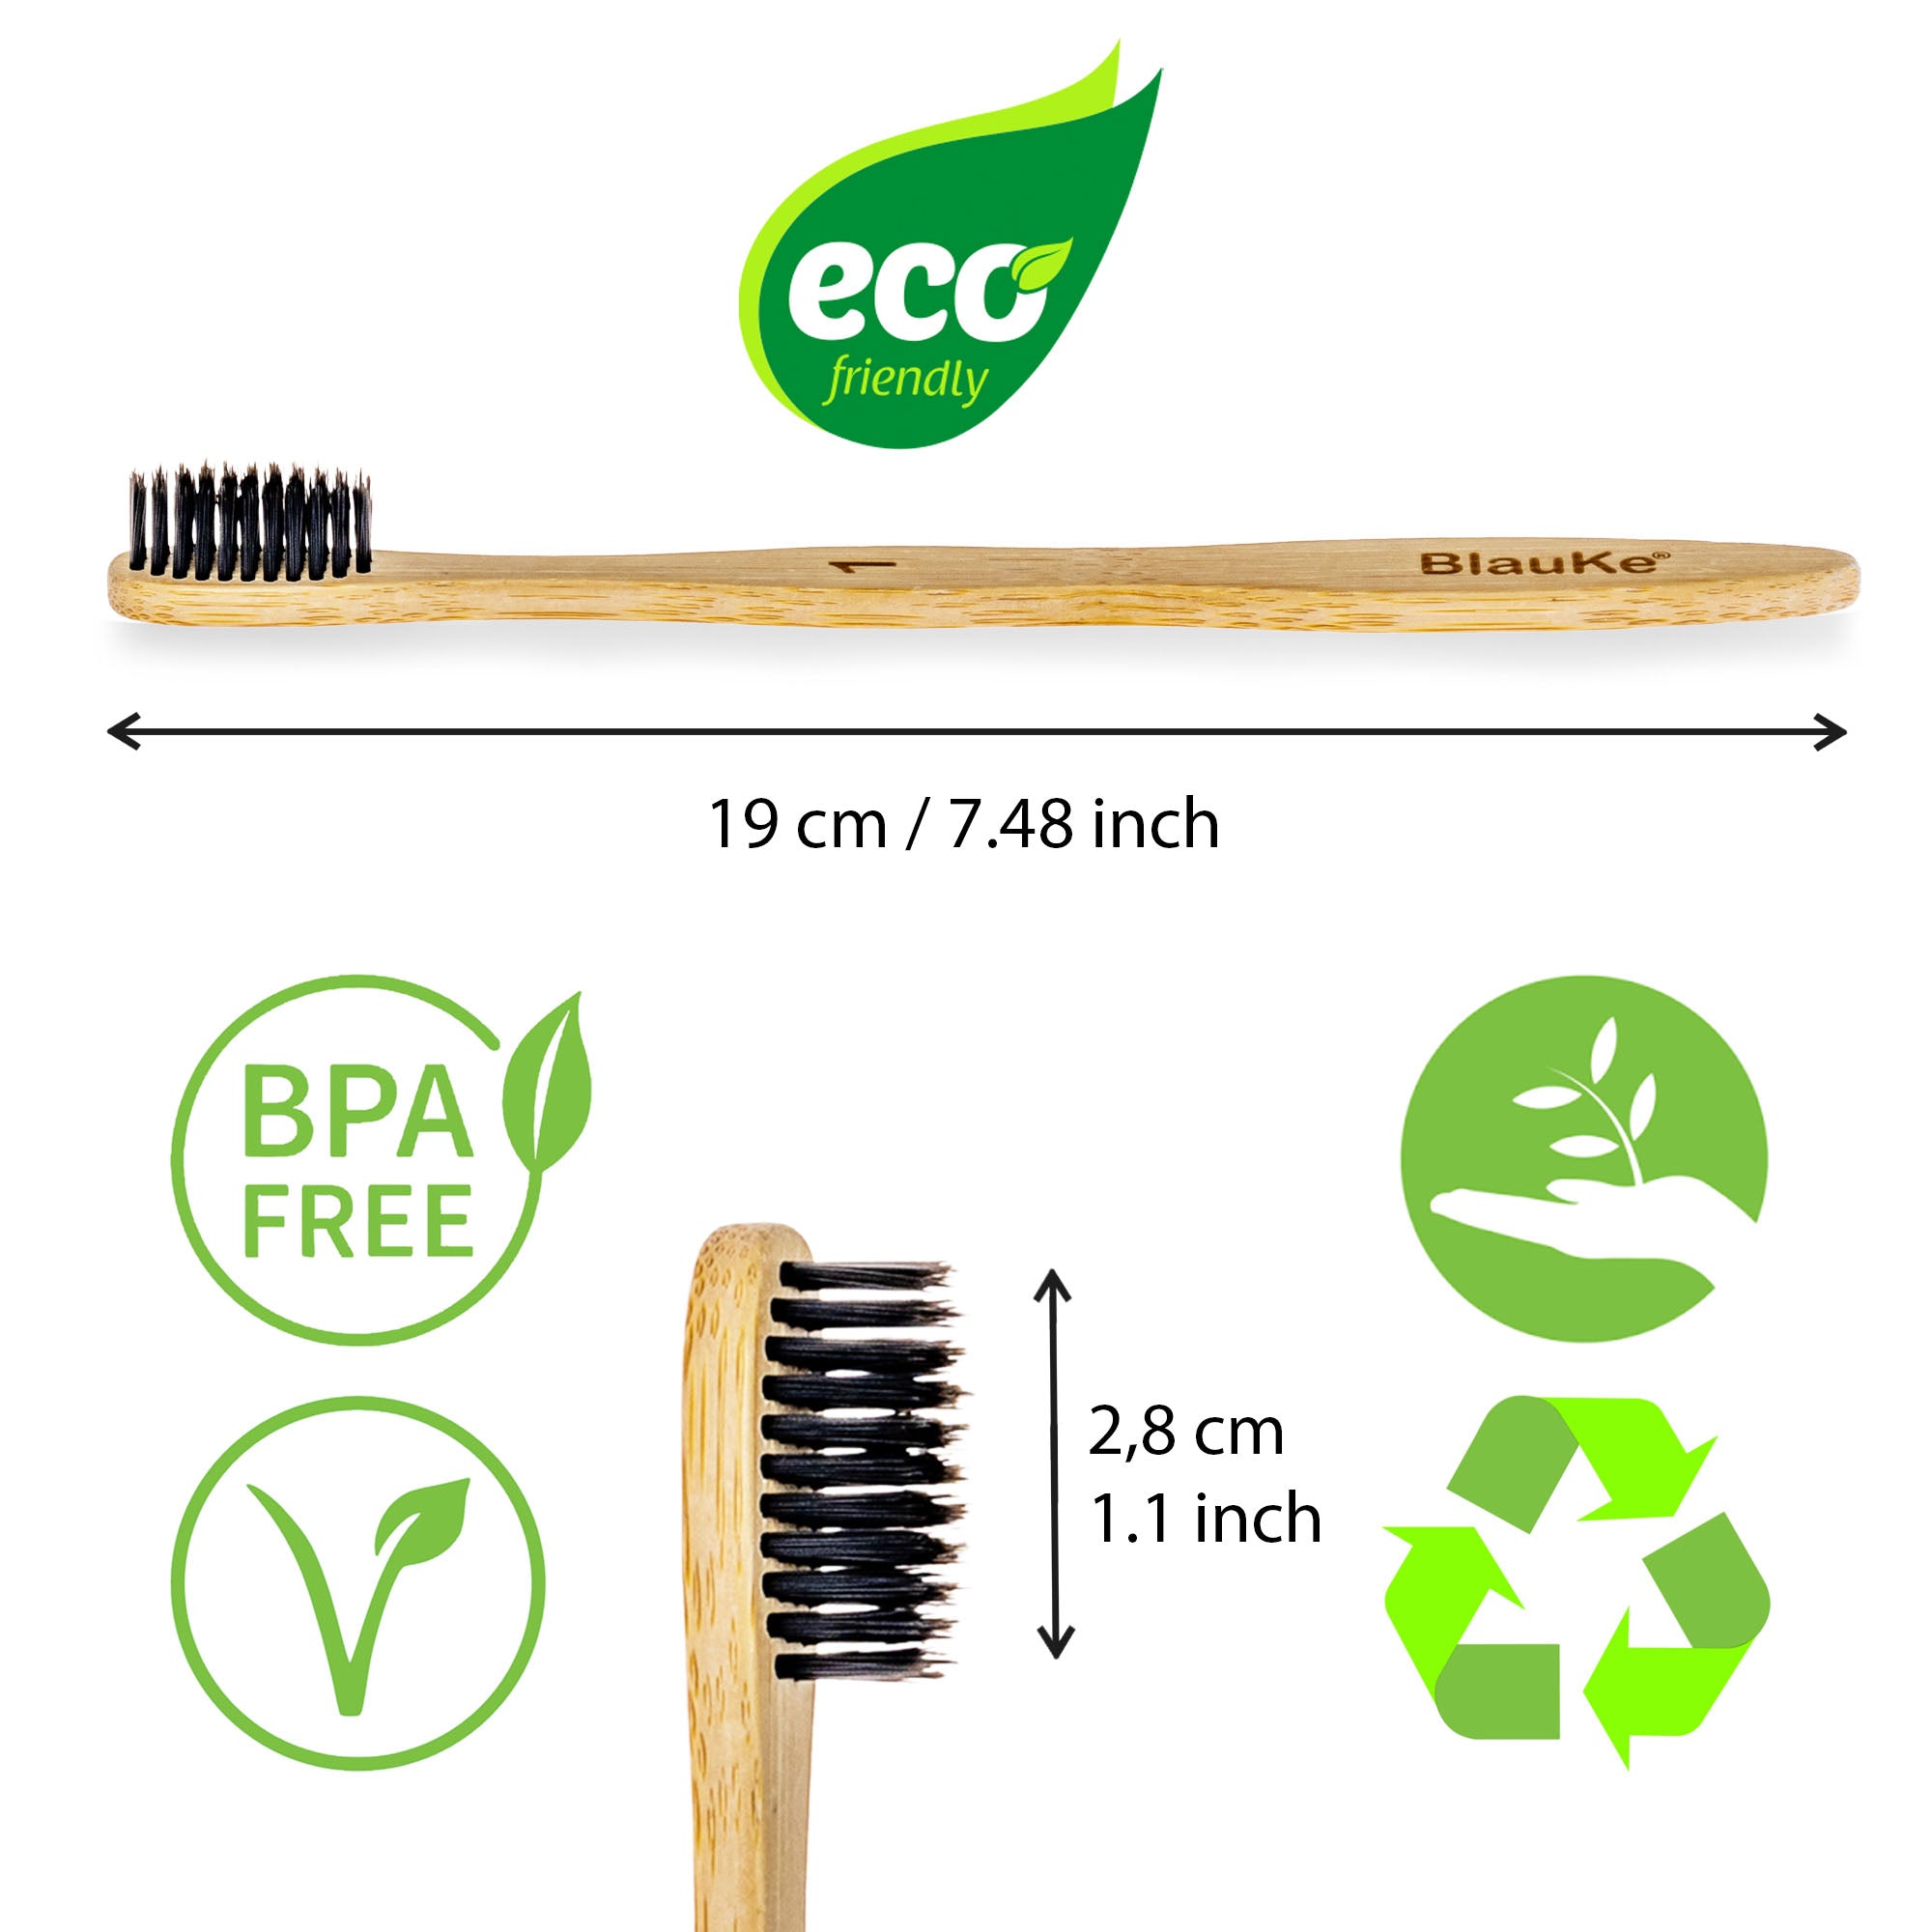 Bamboo Toothbrush Set 4-Pack - Bamboo Toothbrushes with Soft Bristles for Adults - Eco-Friendly, Biodegradable, Natural Wooden Toothbrushes